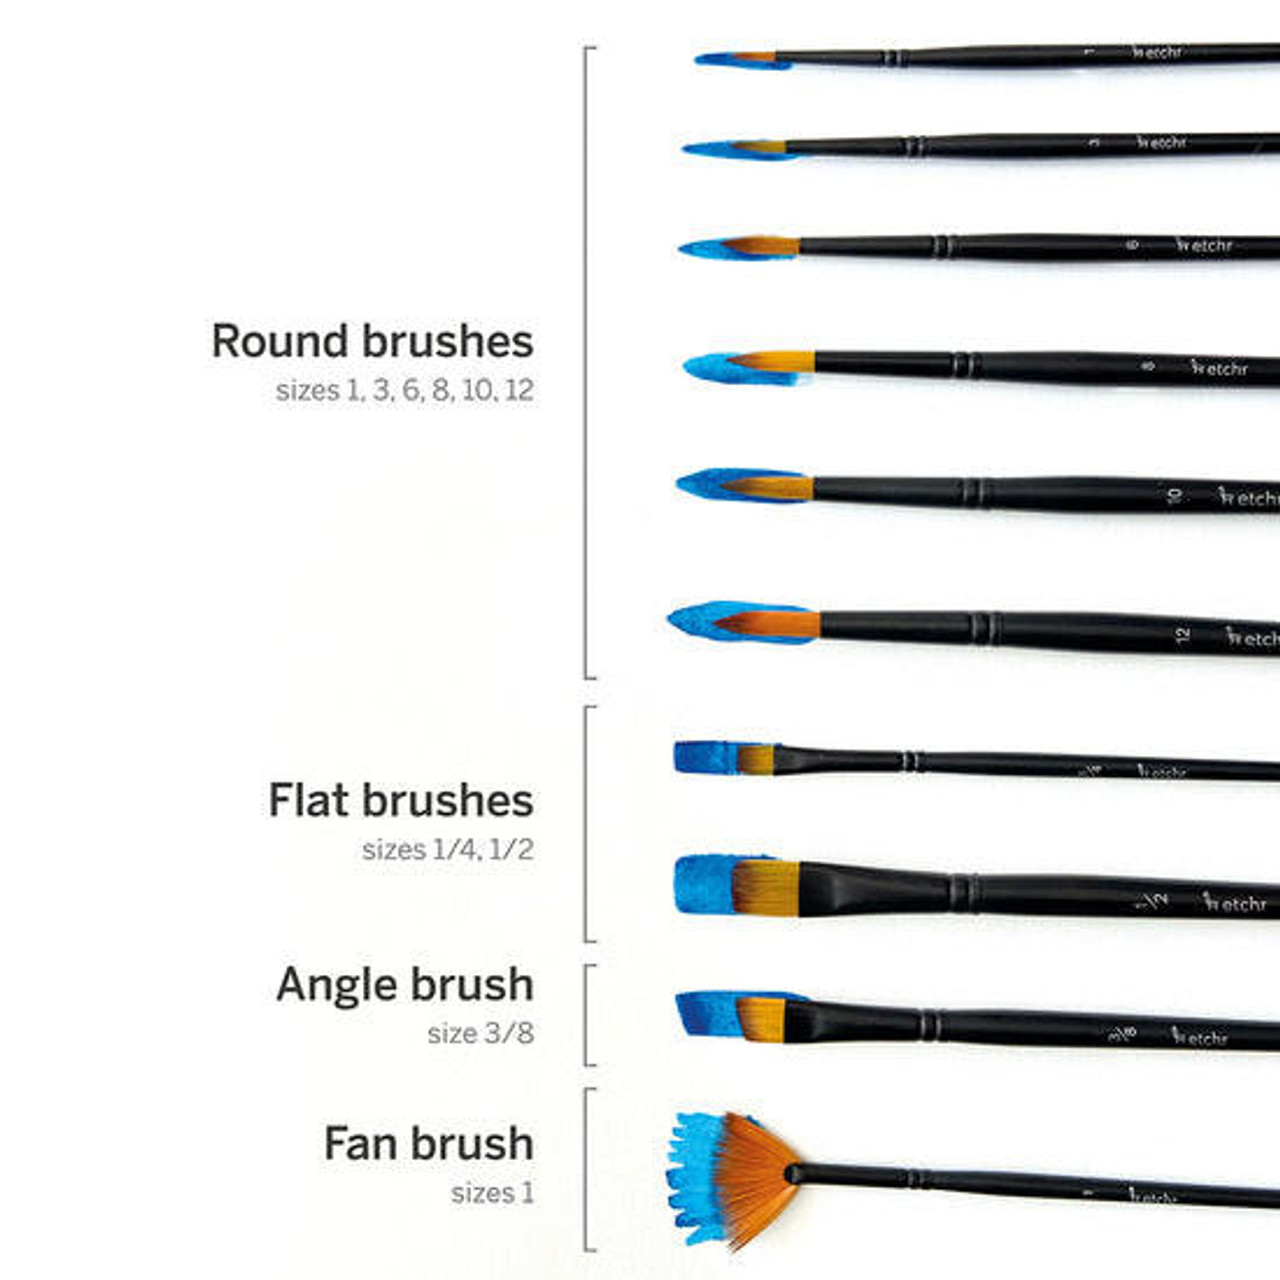 https://cdn11.bigcommerce.com/s-9uf88xhege/images/stencil/1280x1280/products/13780/99691/etchr-professional-watercolor-brushes-10-assorted__17465.1700032655.jpg?c=1?imbypass=on